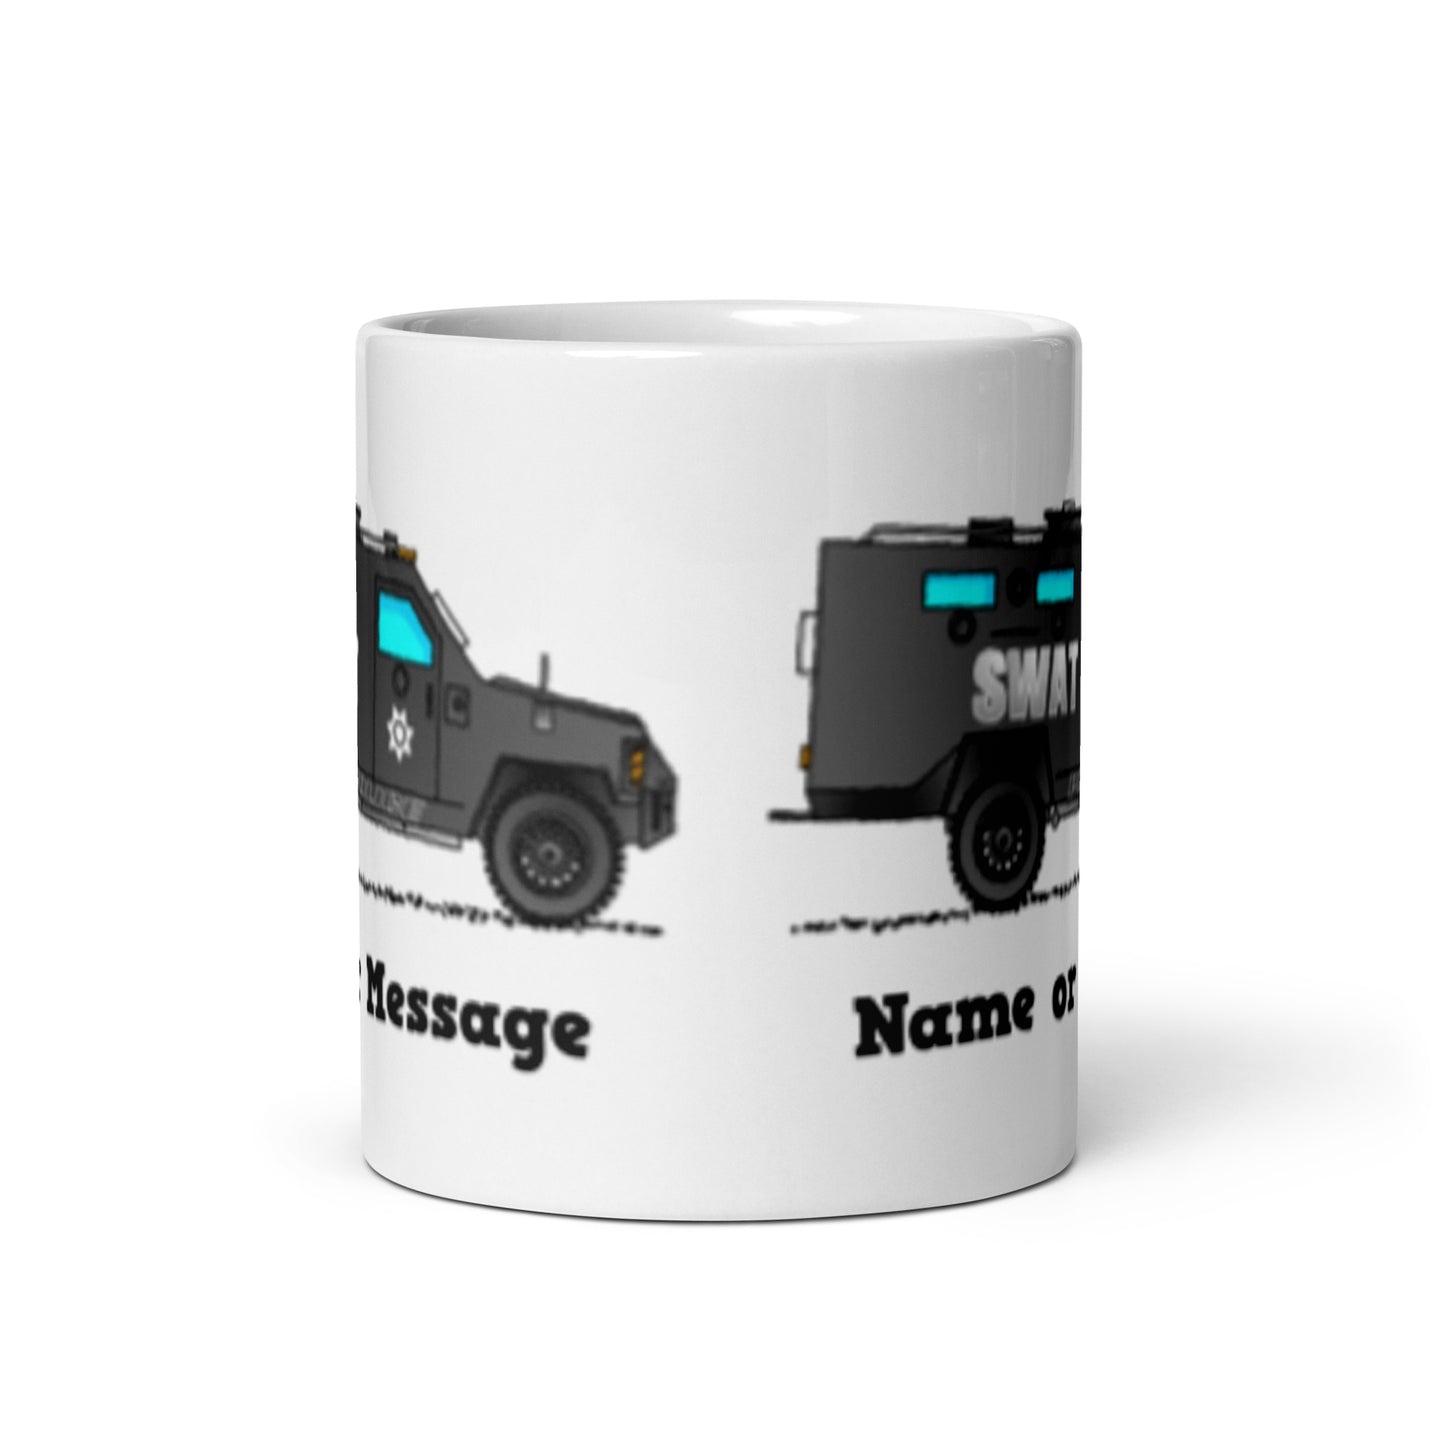 Police SWAT Truck Mug. Personalized Coffee Cup, S.W.A.T. Car Custom Name M056